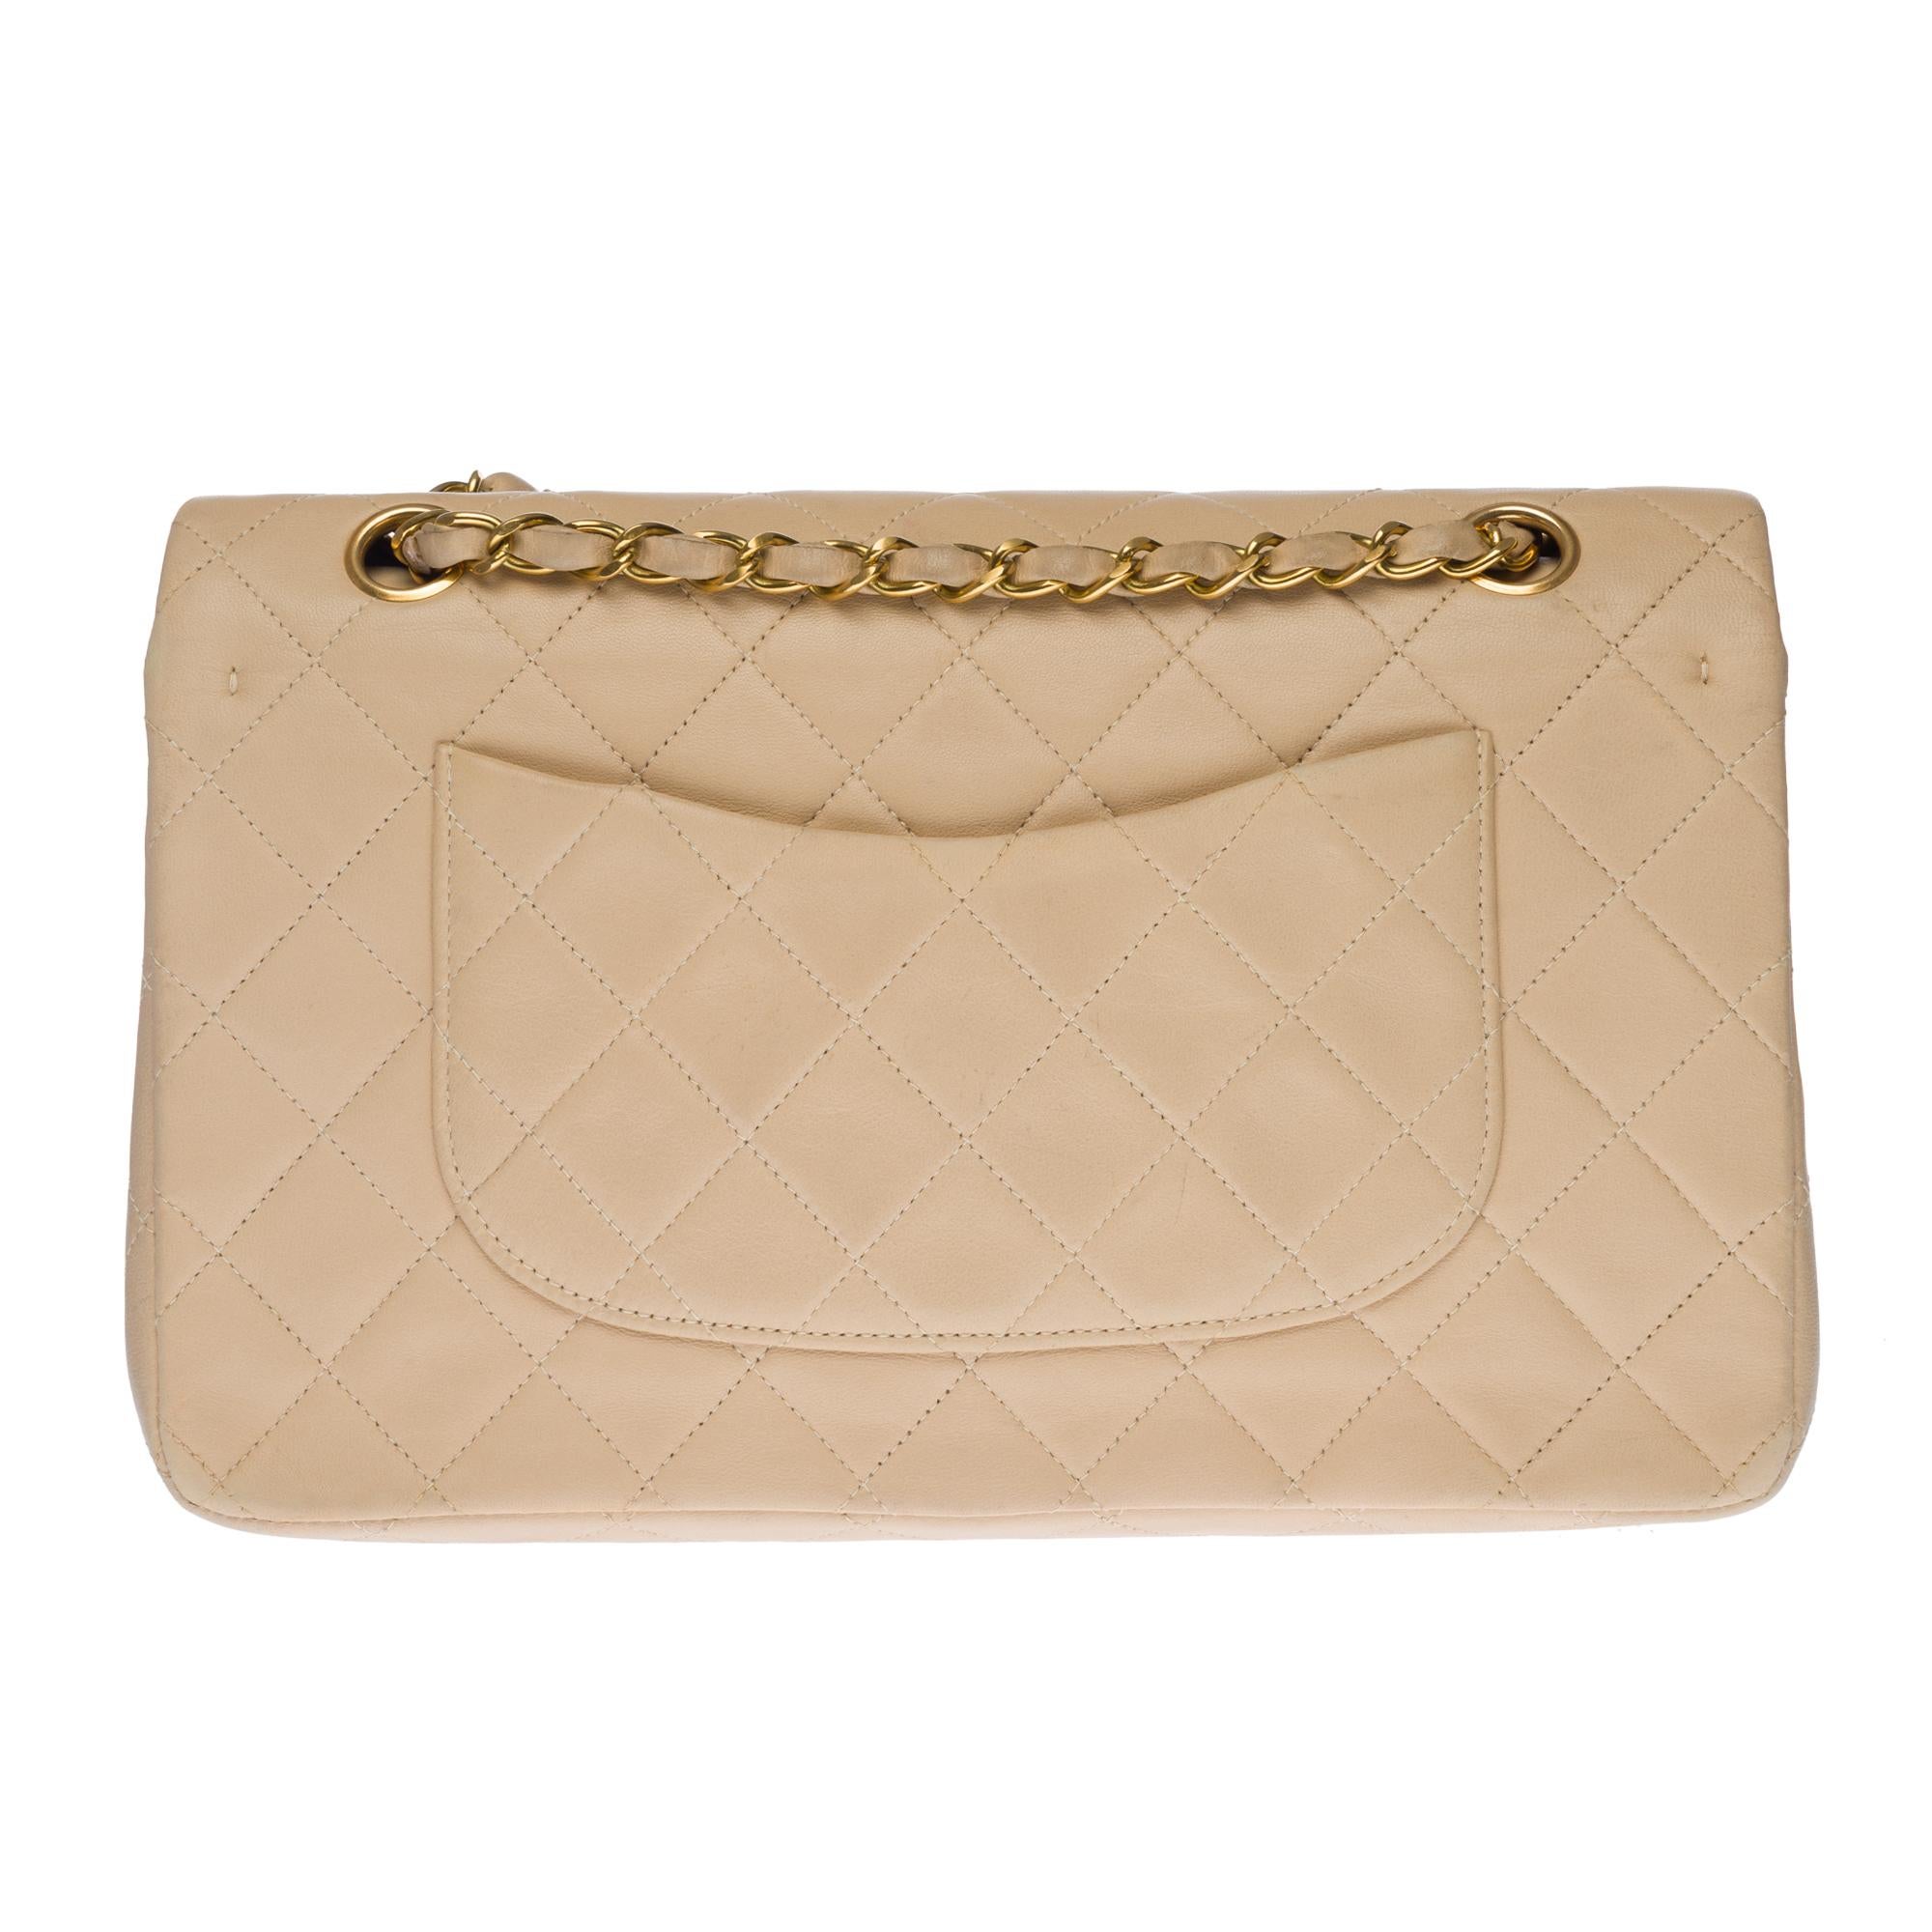 Beige Chanel Timeless Medium double flap Shoulder bag in beige quilted leather, GHW